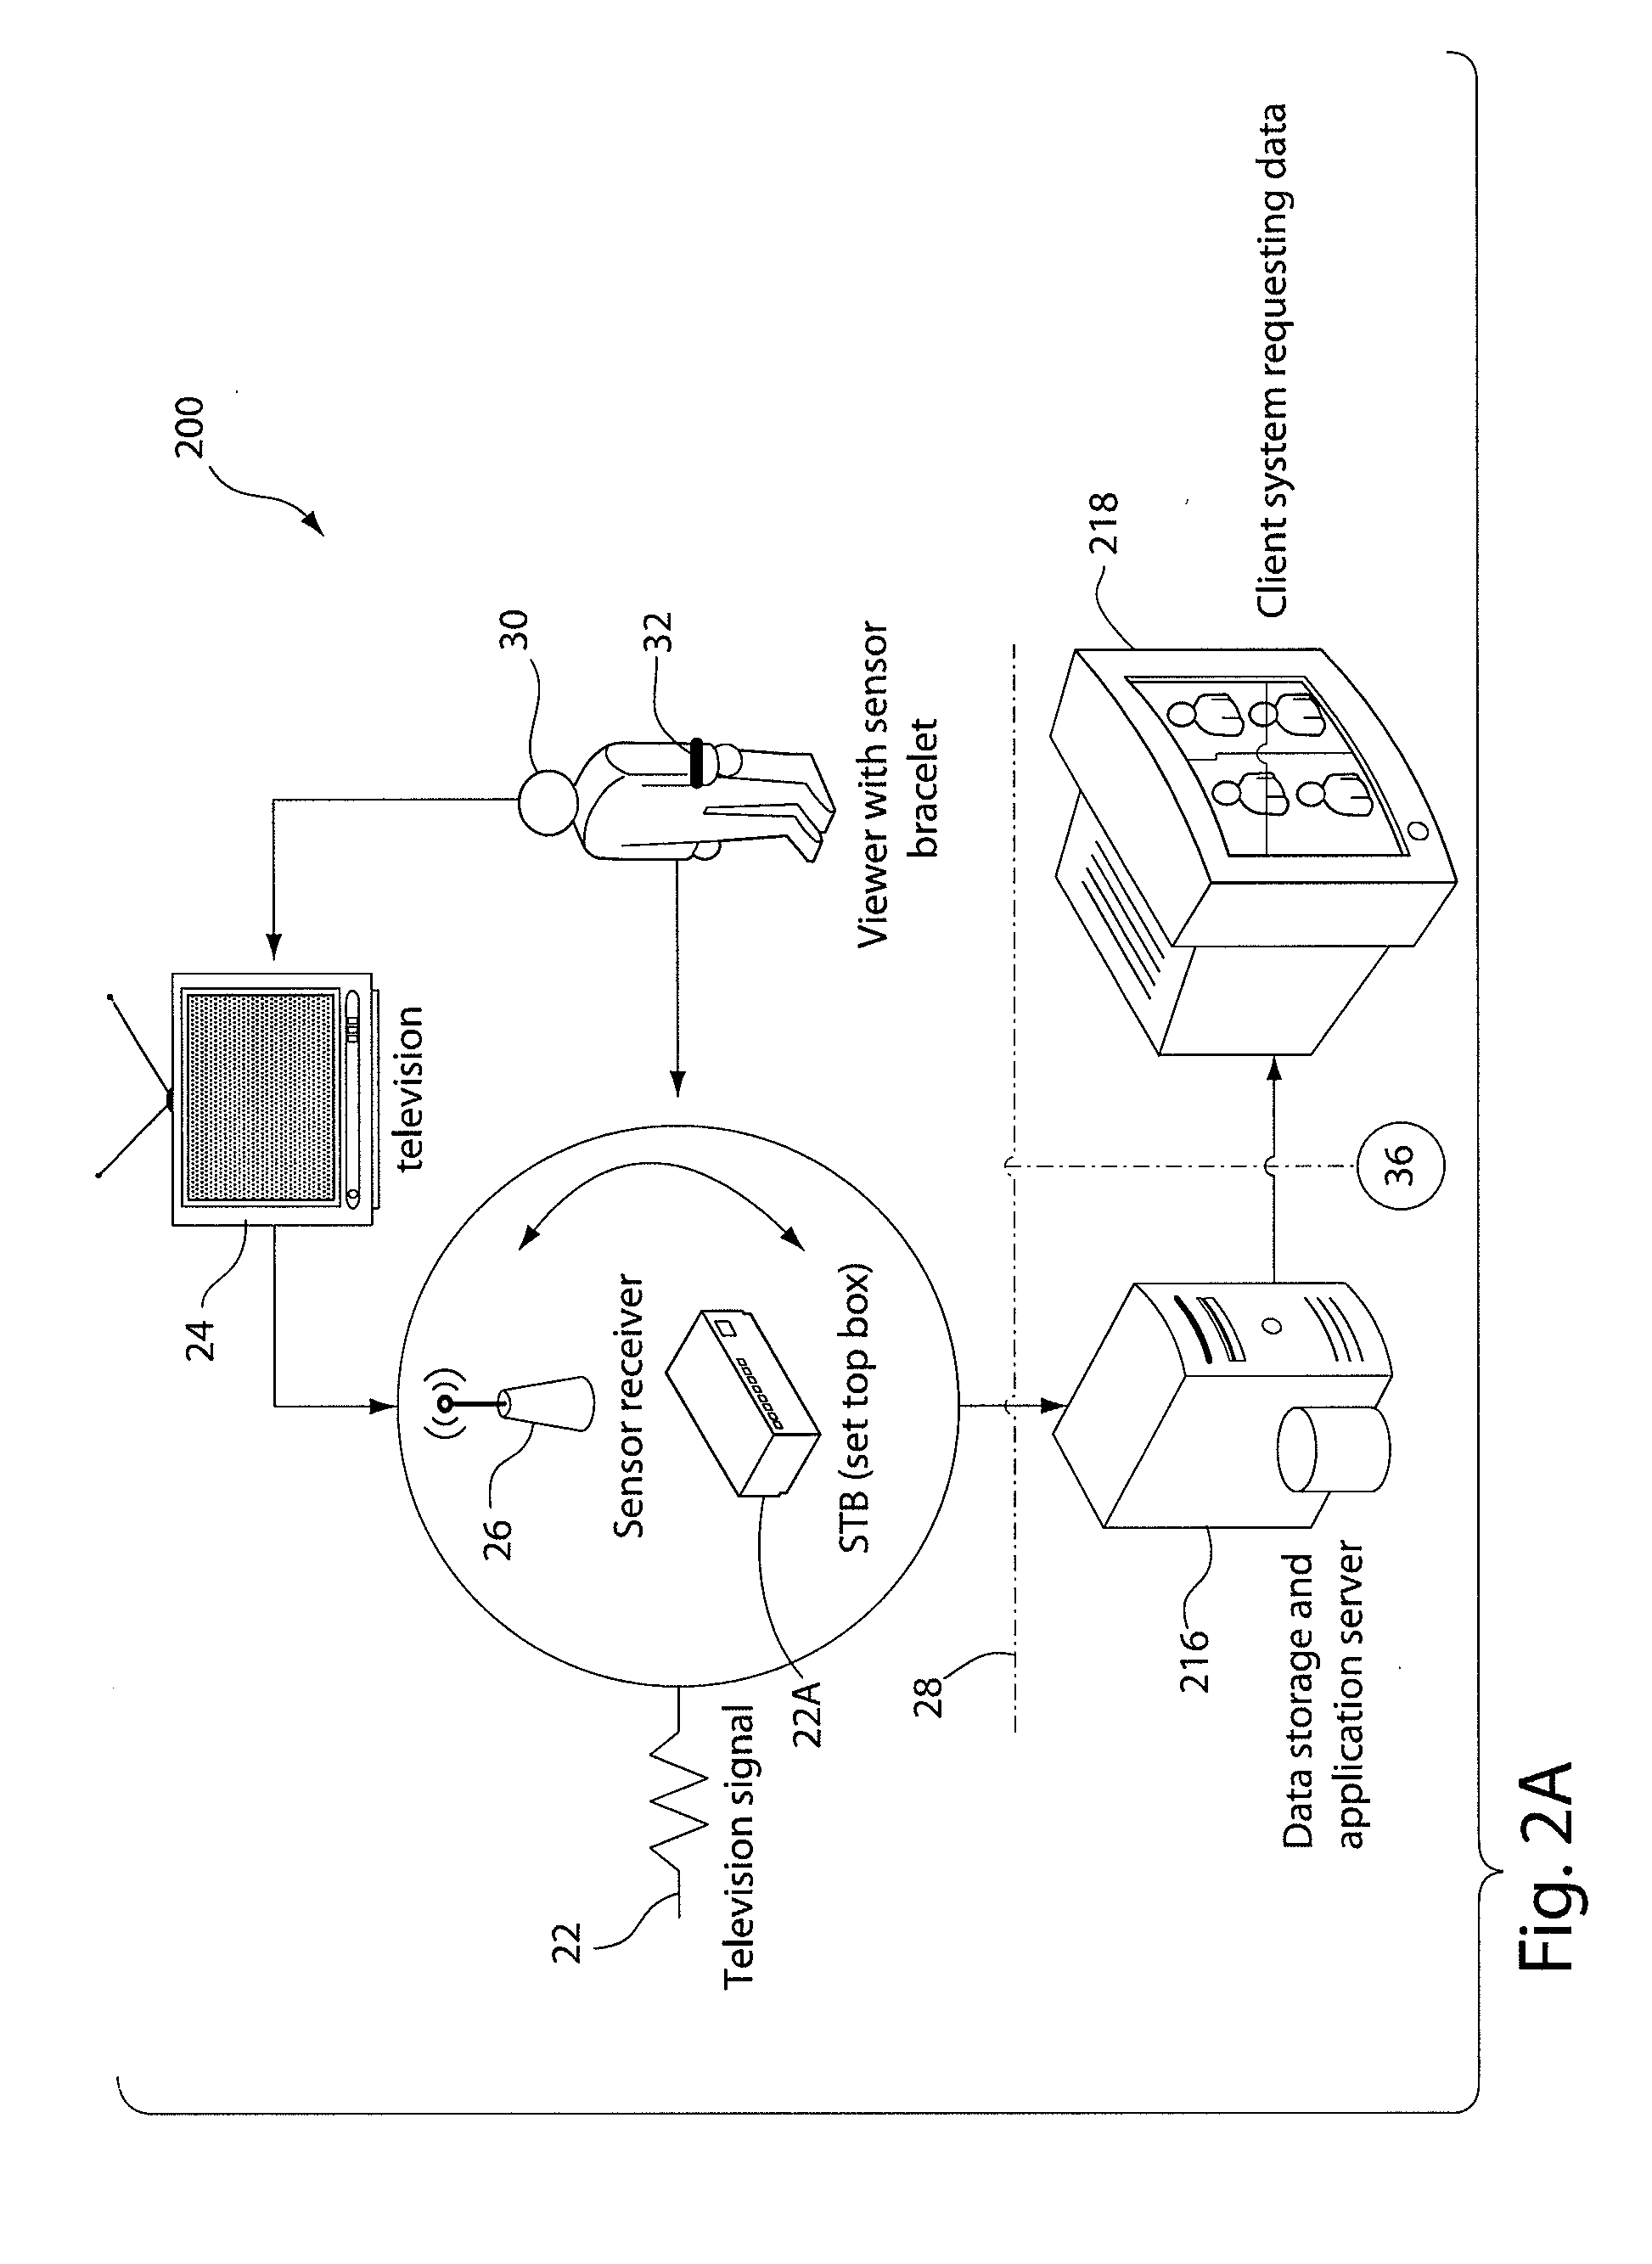 Method and System For Measuring User Experience For Interactive Activities